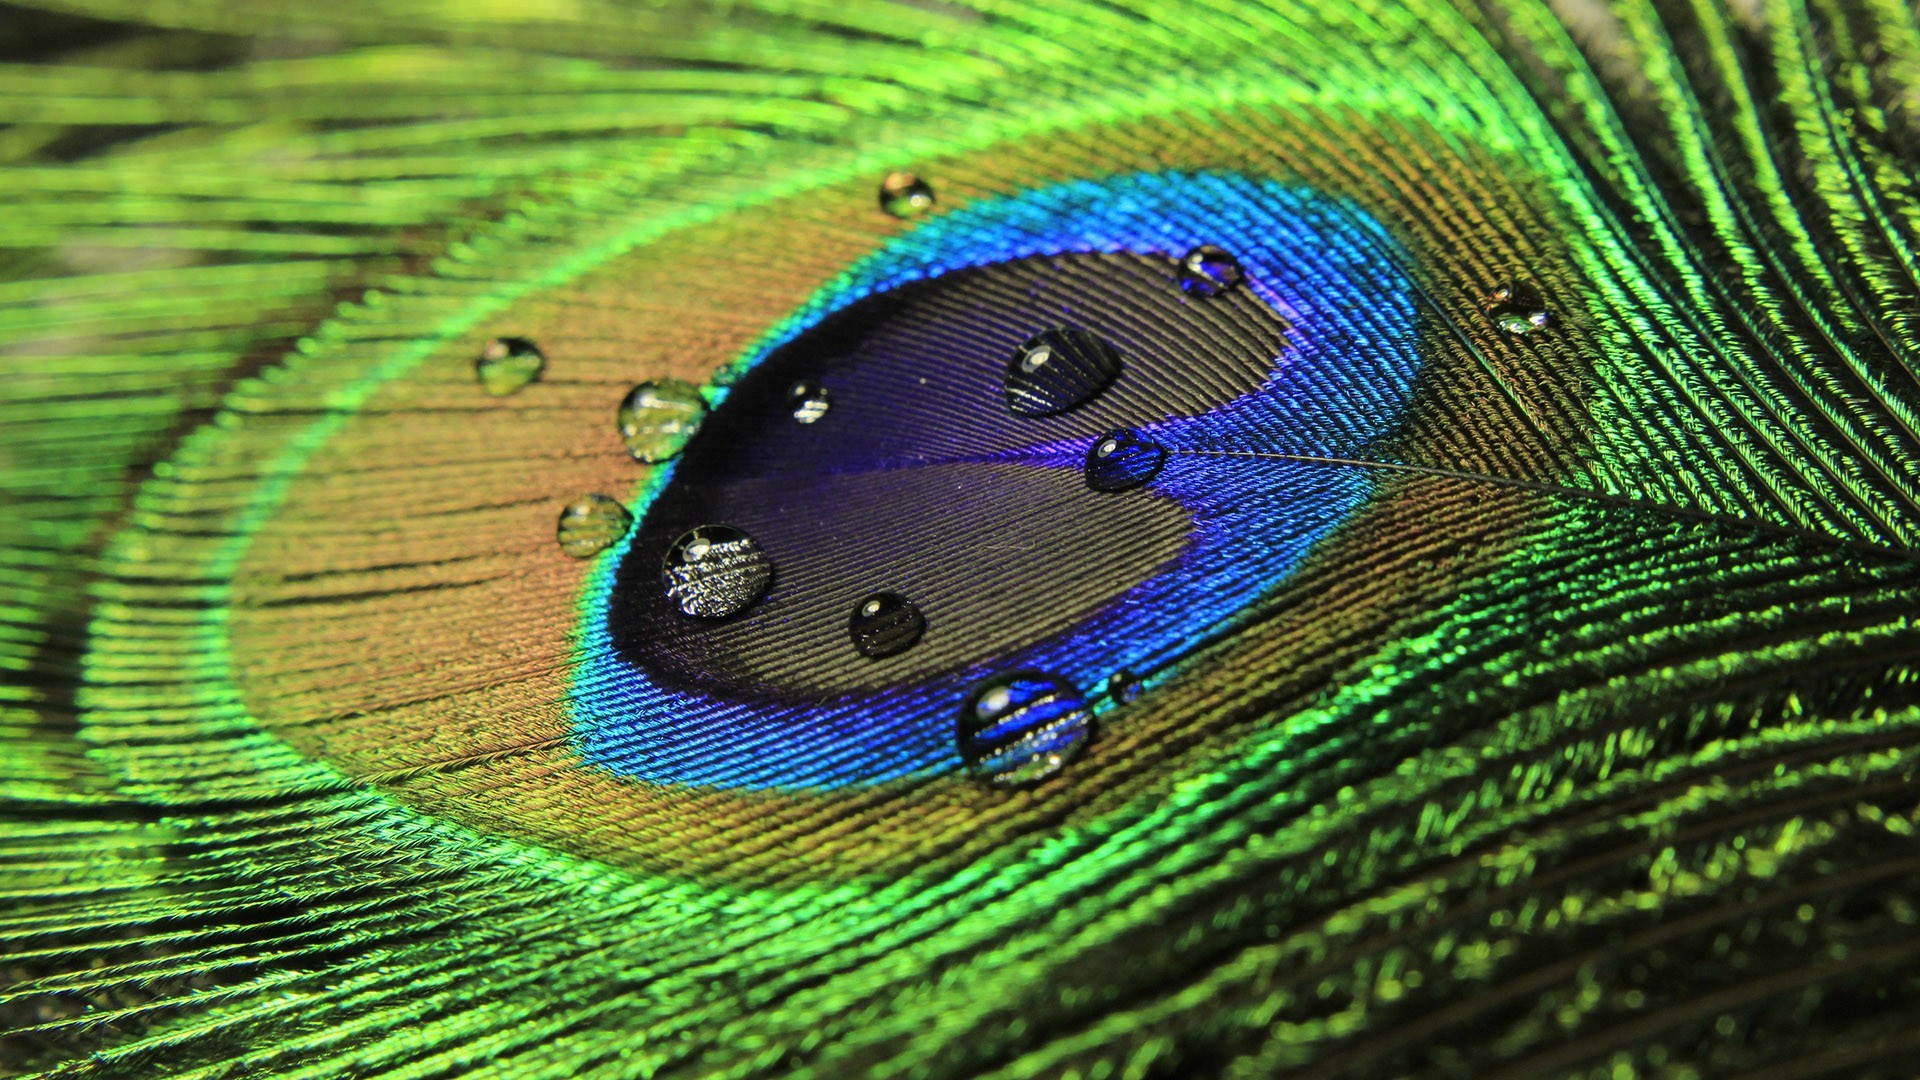 General 1920x1080 peacocks feathers water drops photography macro green